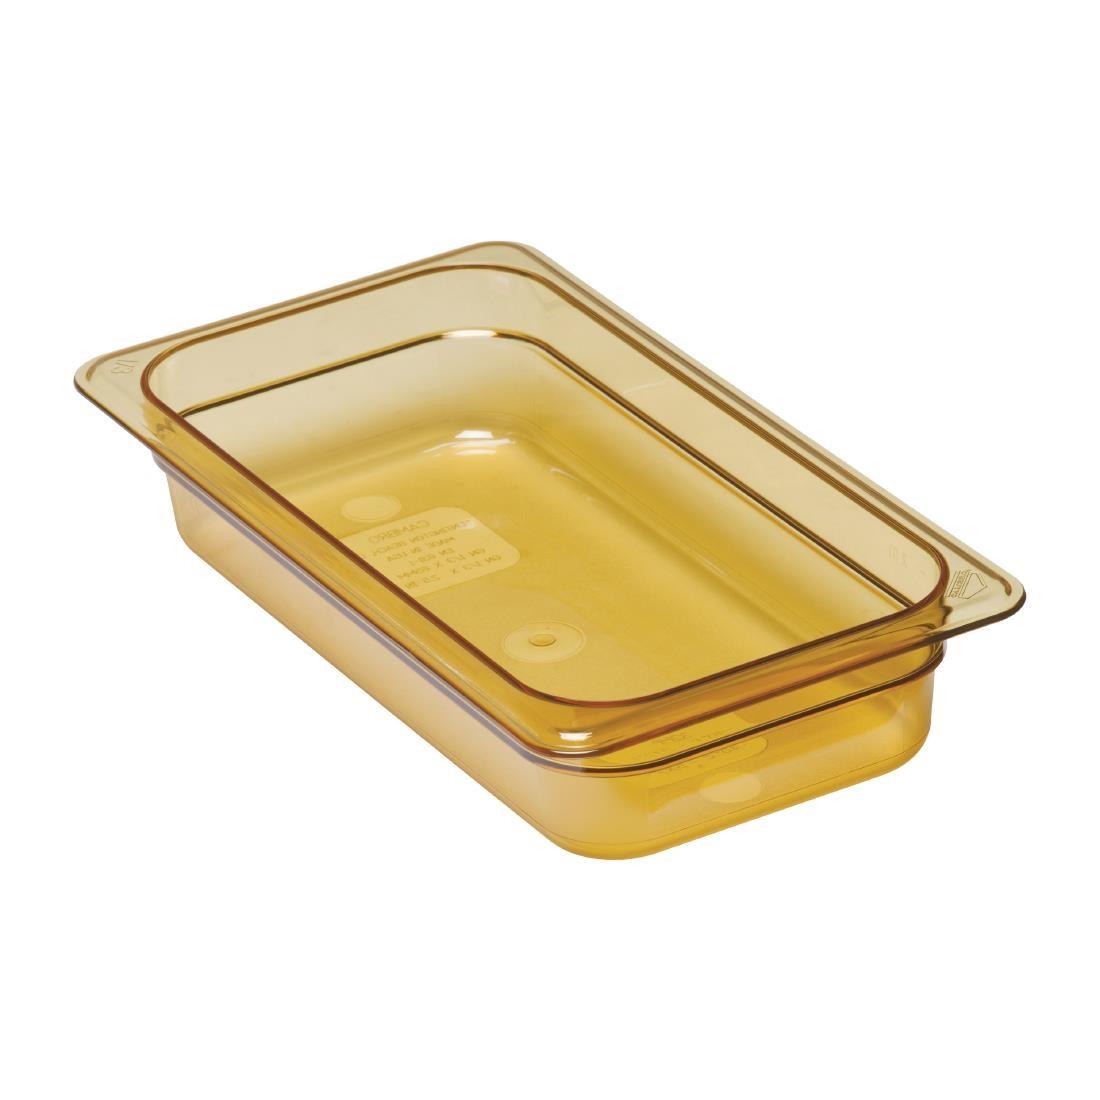 Cambro High Heat 1/3 Gastronorm Food Pan 65mm - DW484  - 1